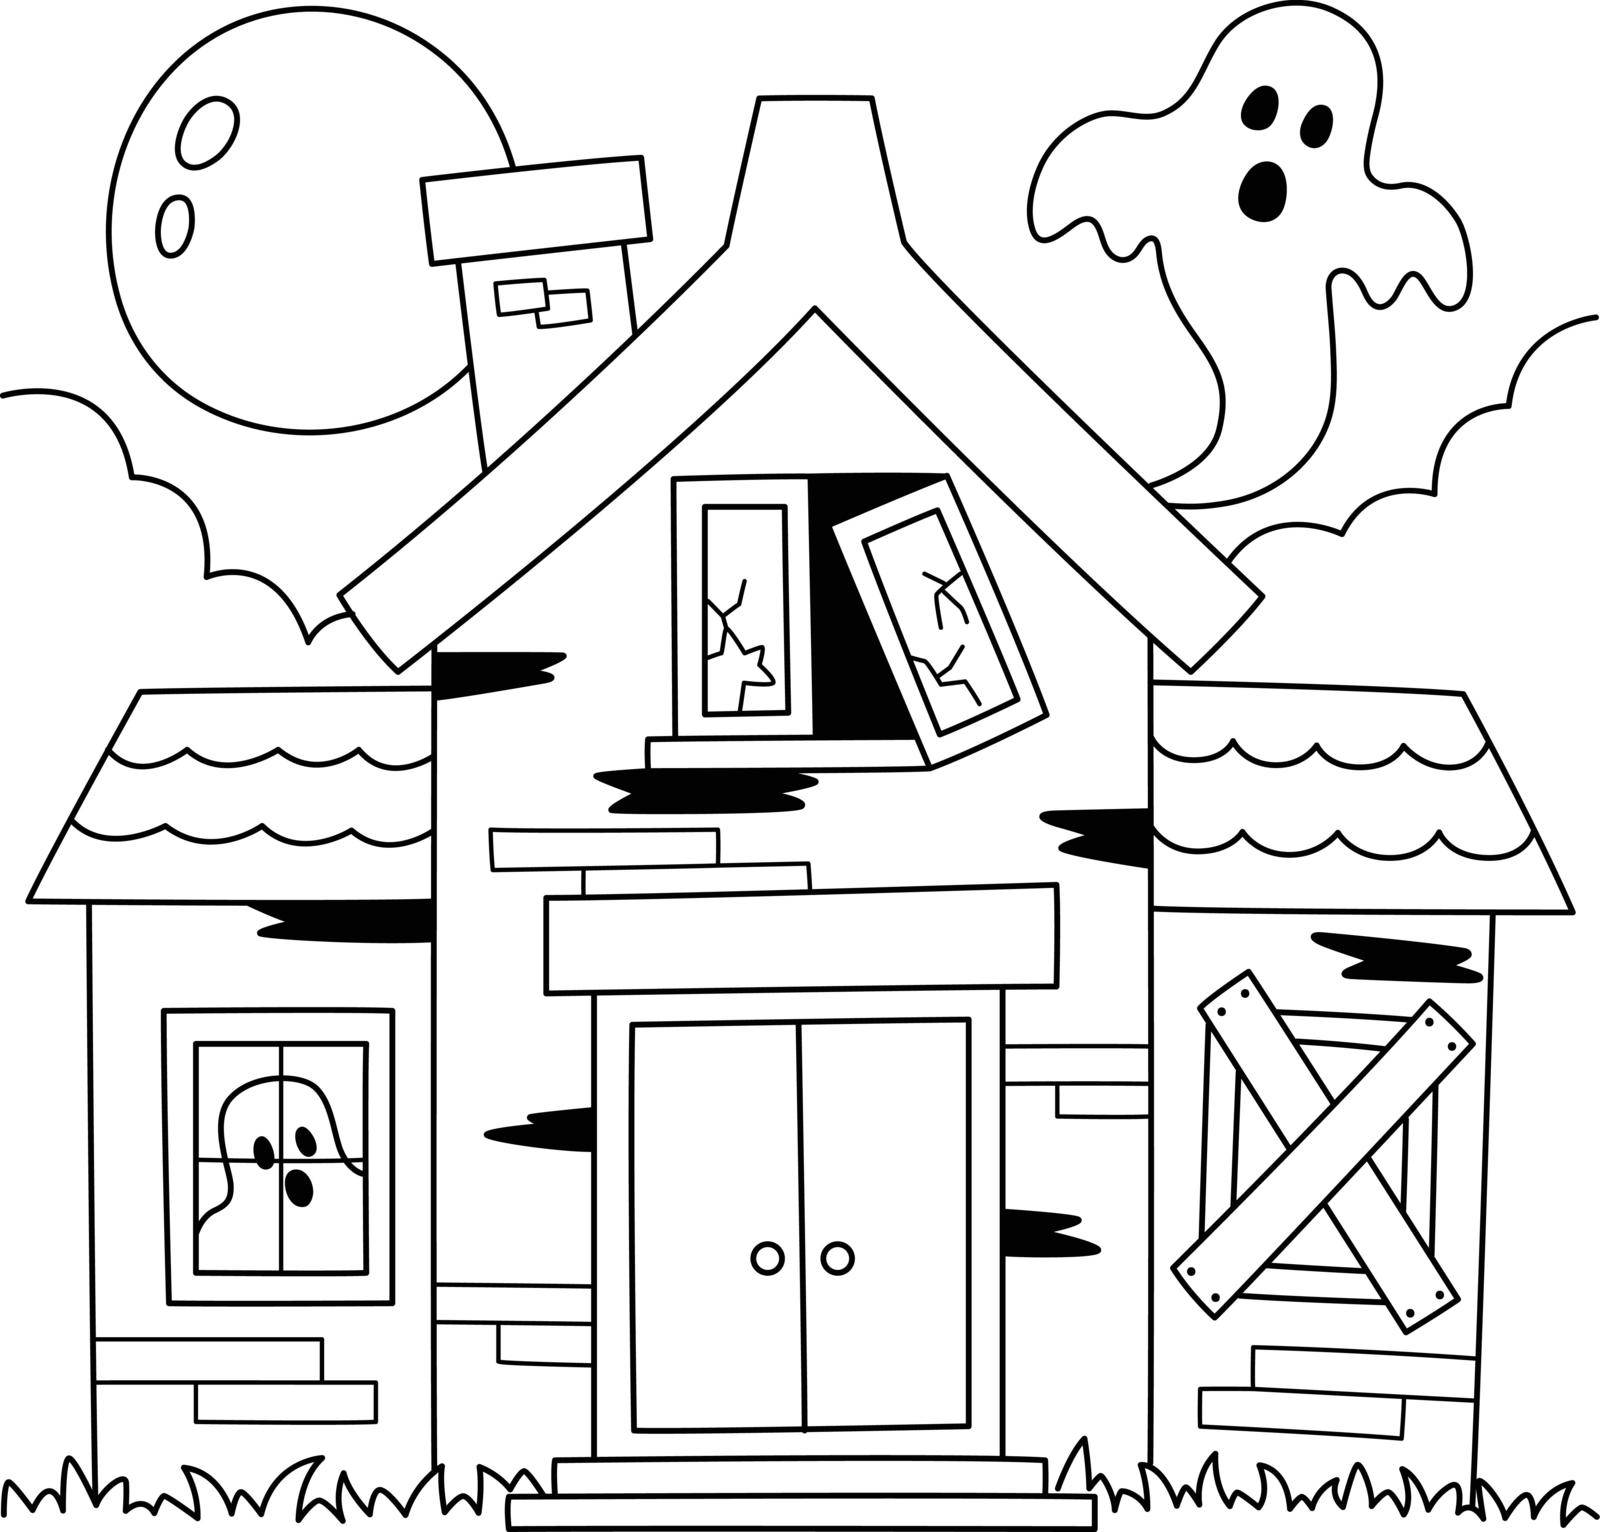 Haunted House Halloween Coloring Page for Kids by abbydesign